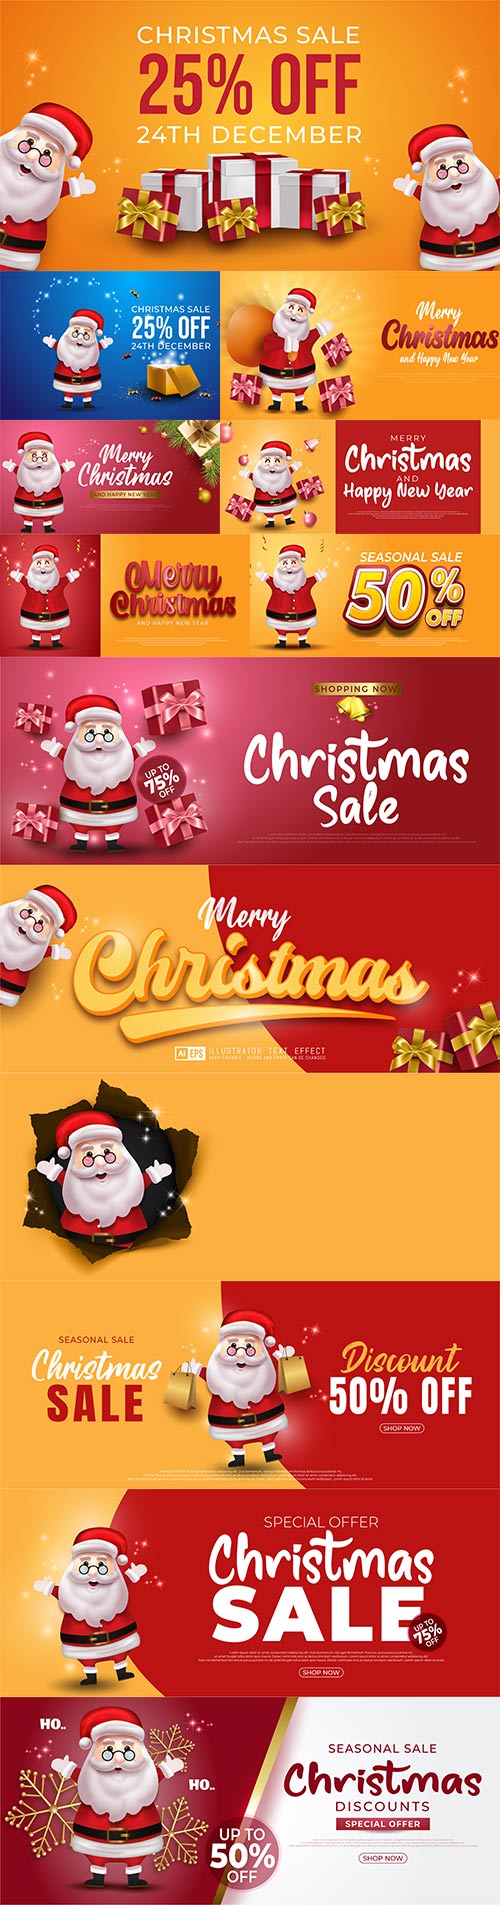 Merry christmas and happy new year banner with santa claus premium vector